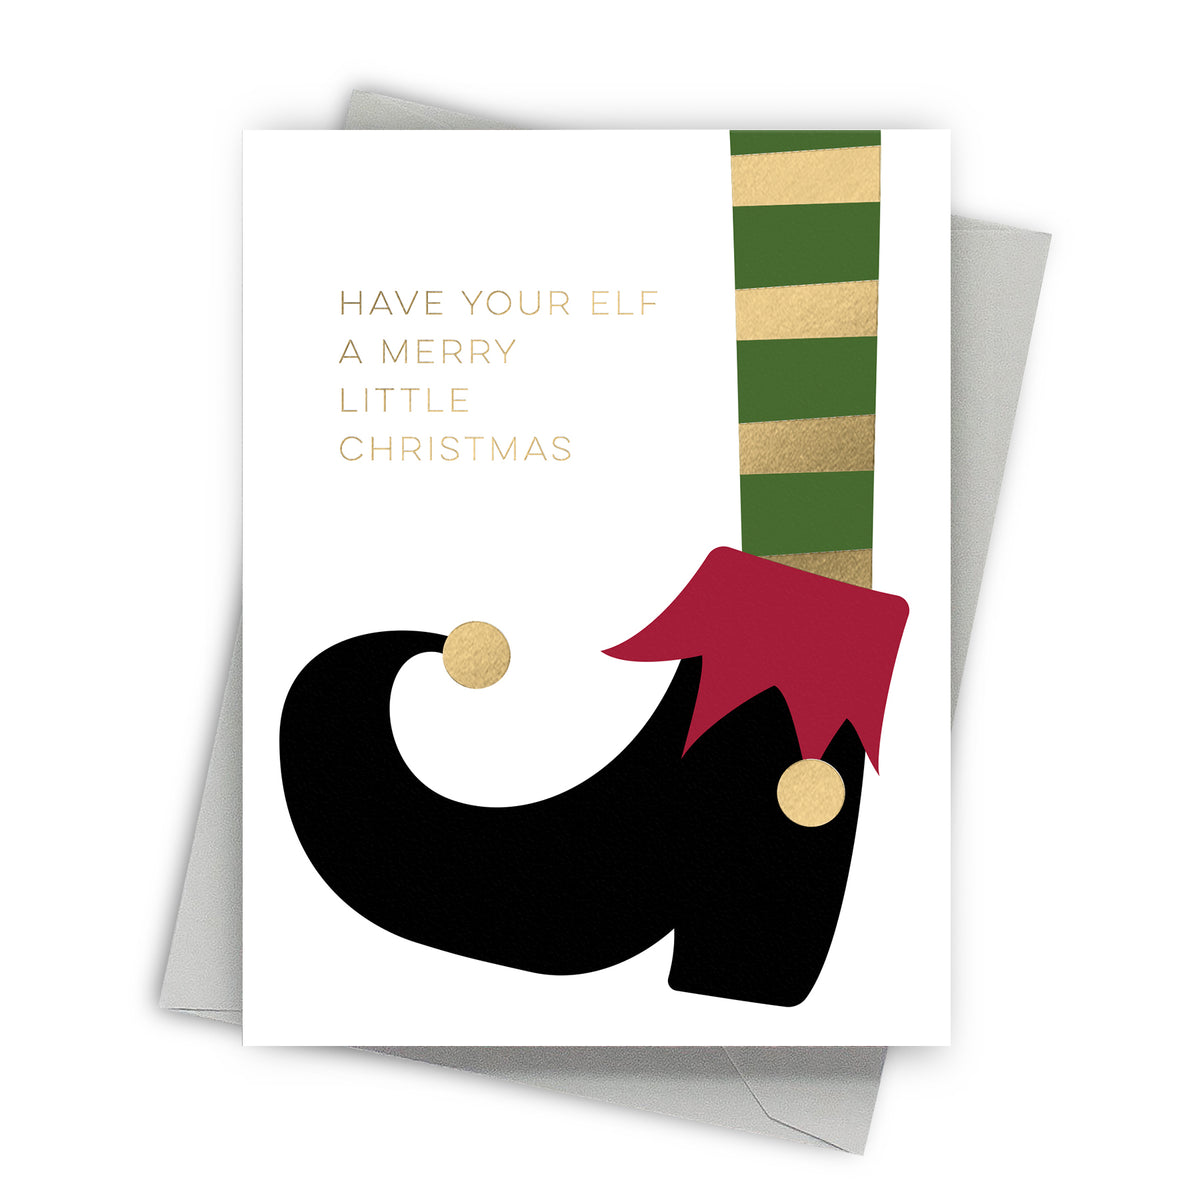 Merry Elf Christmas Card by Fine Moments